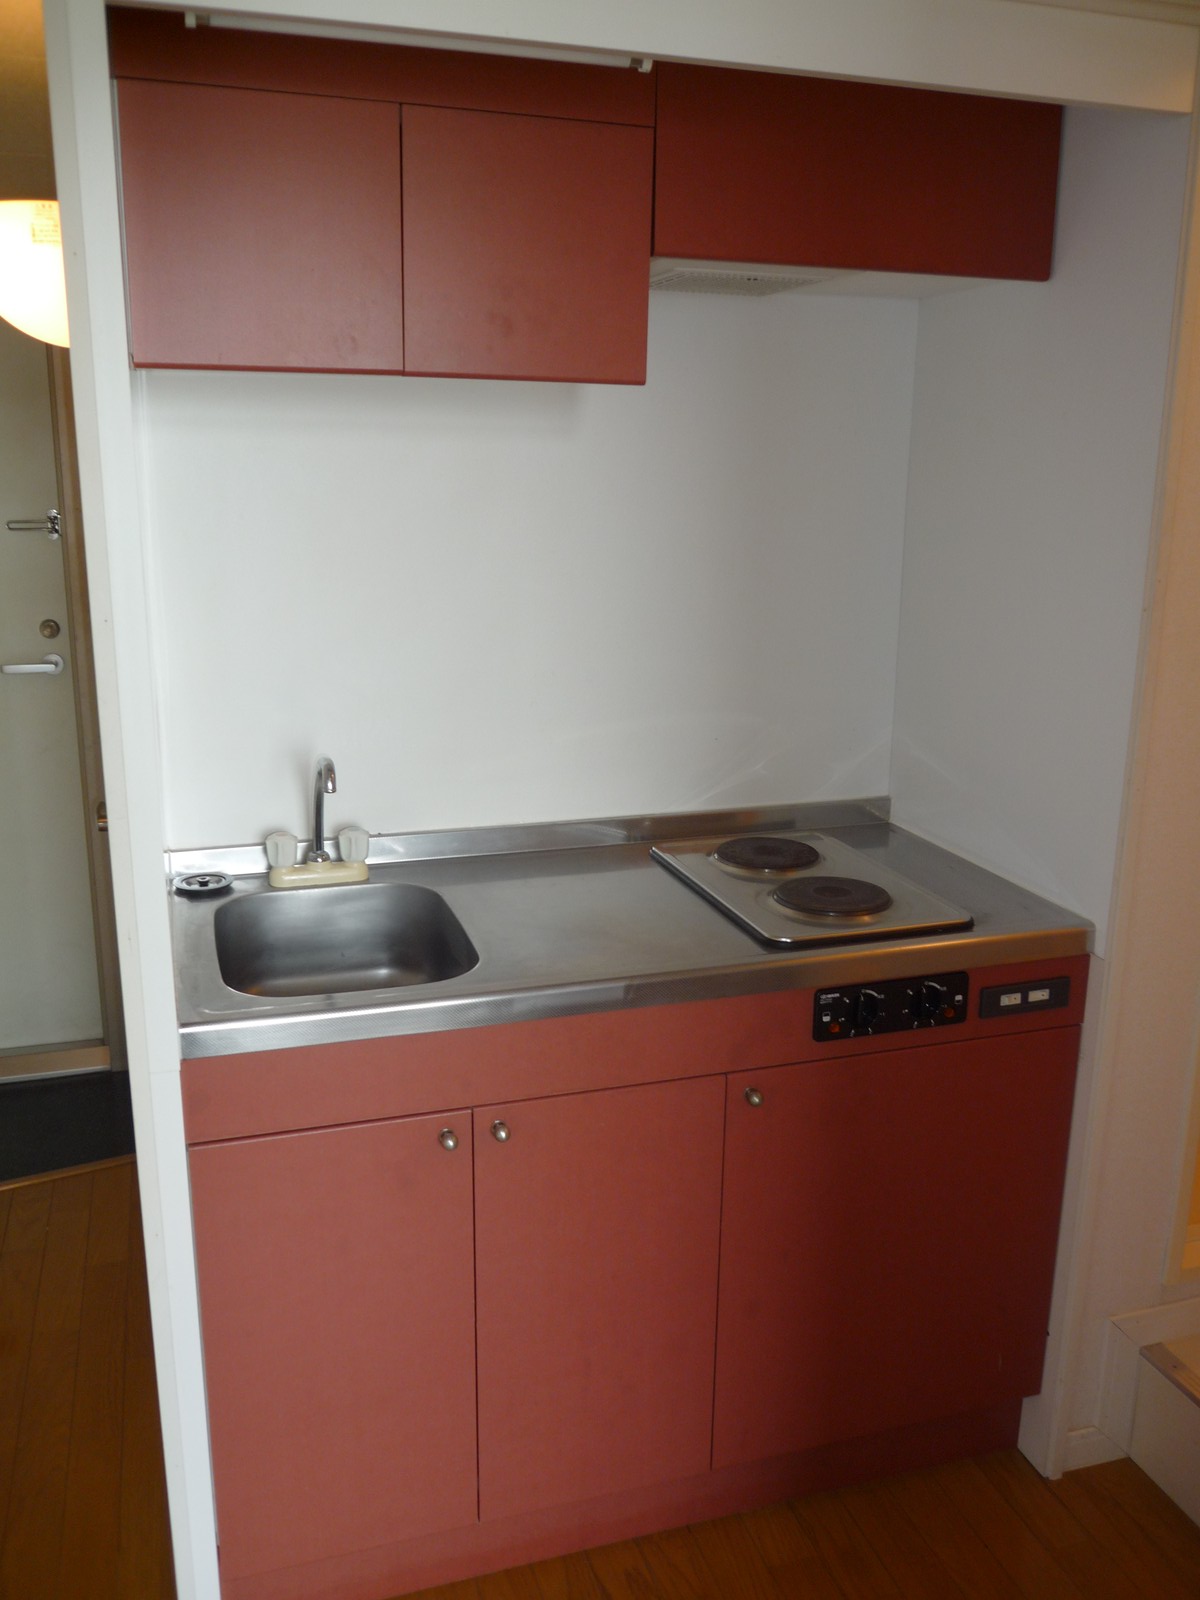 Kitchen. Peace of mind cooking cooking space also because the kitchen electric heating a stove